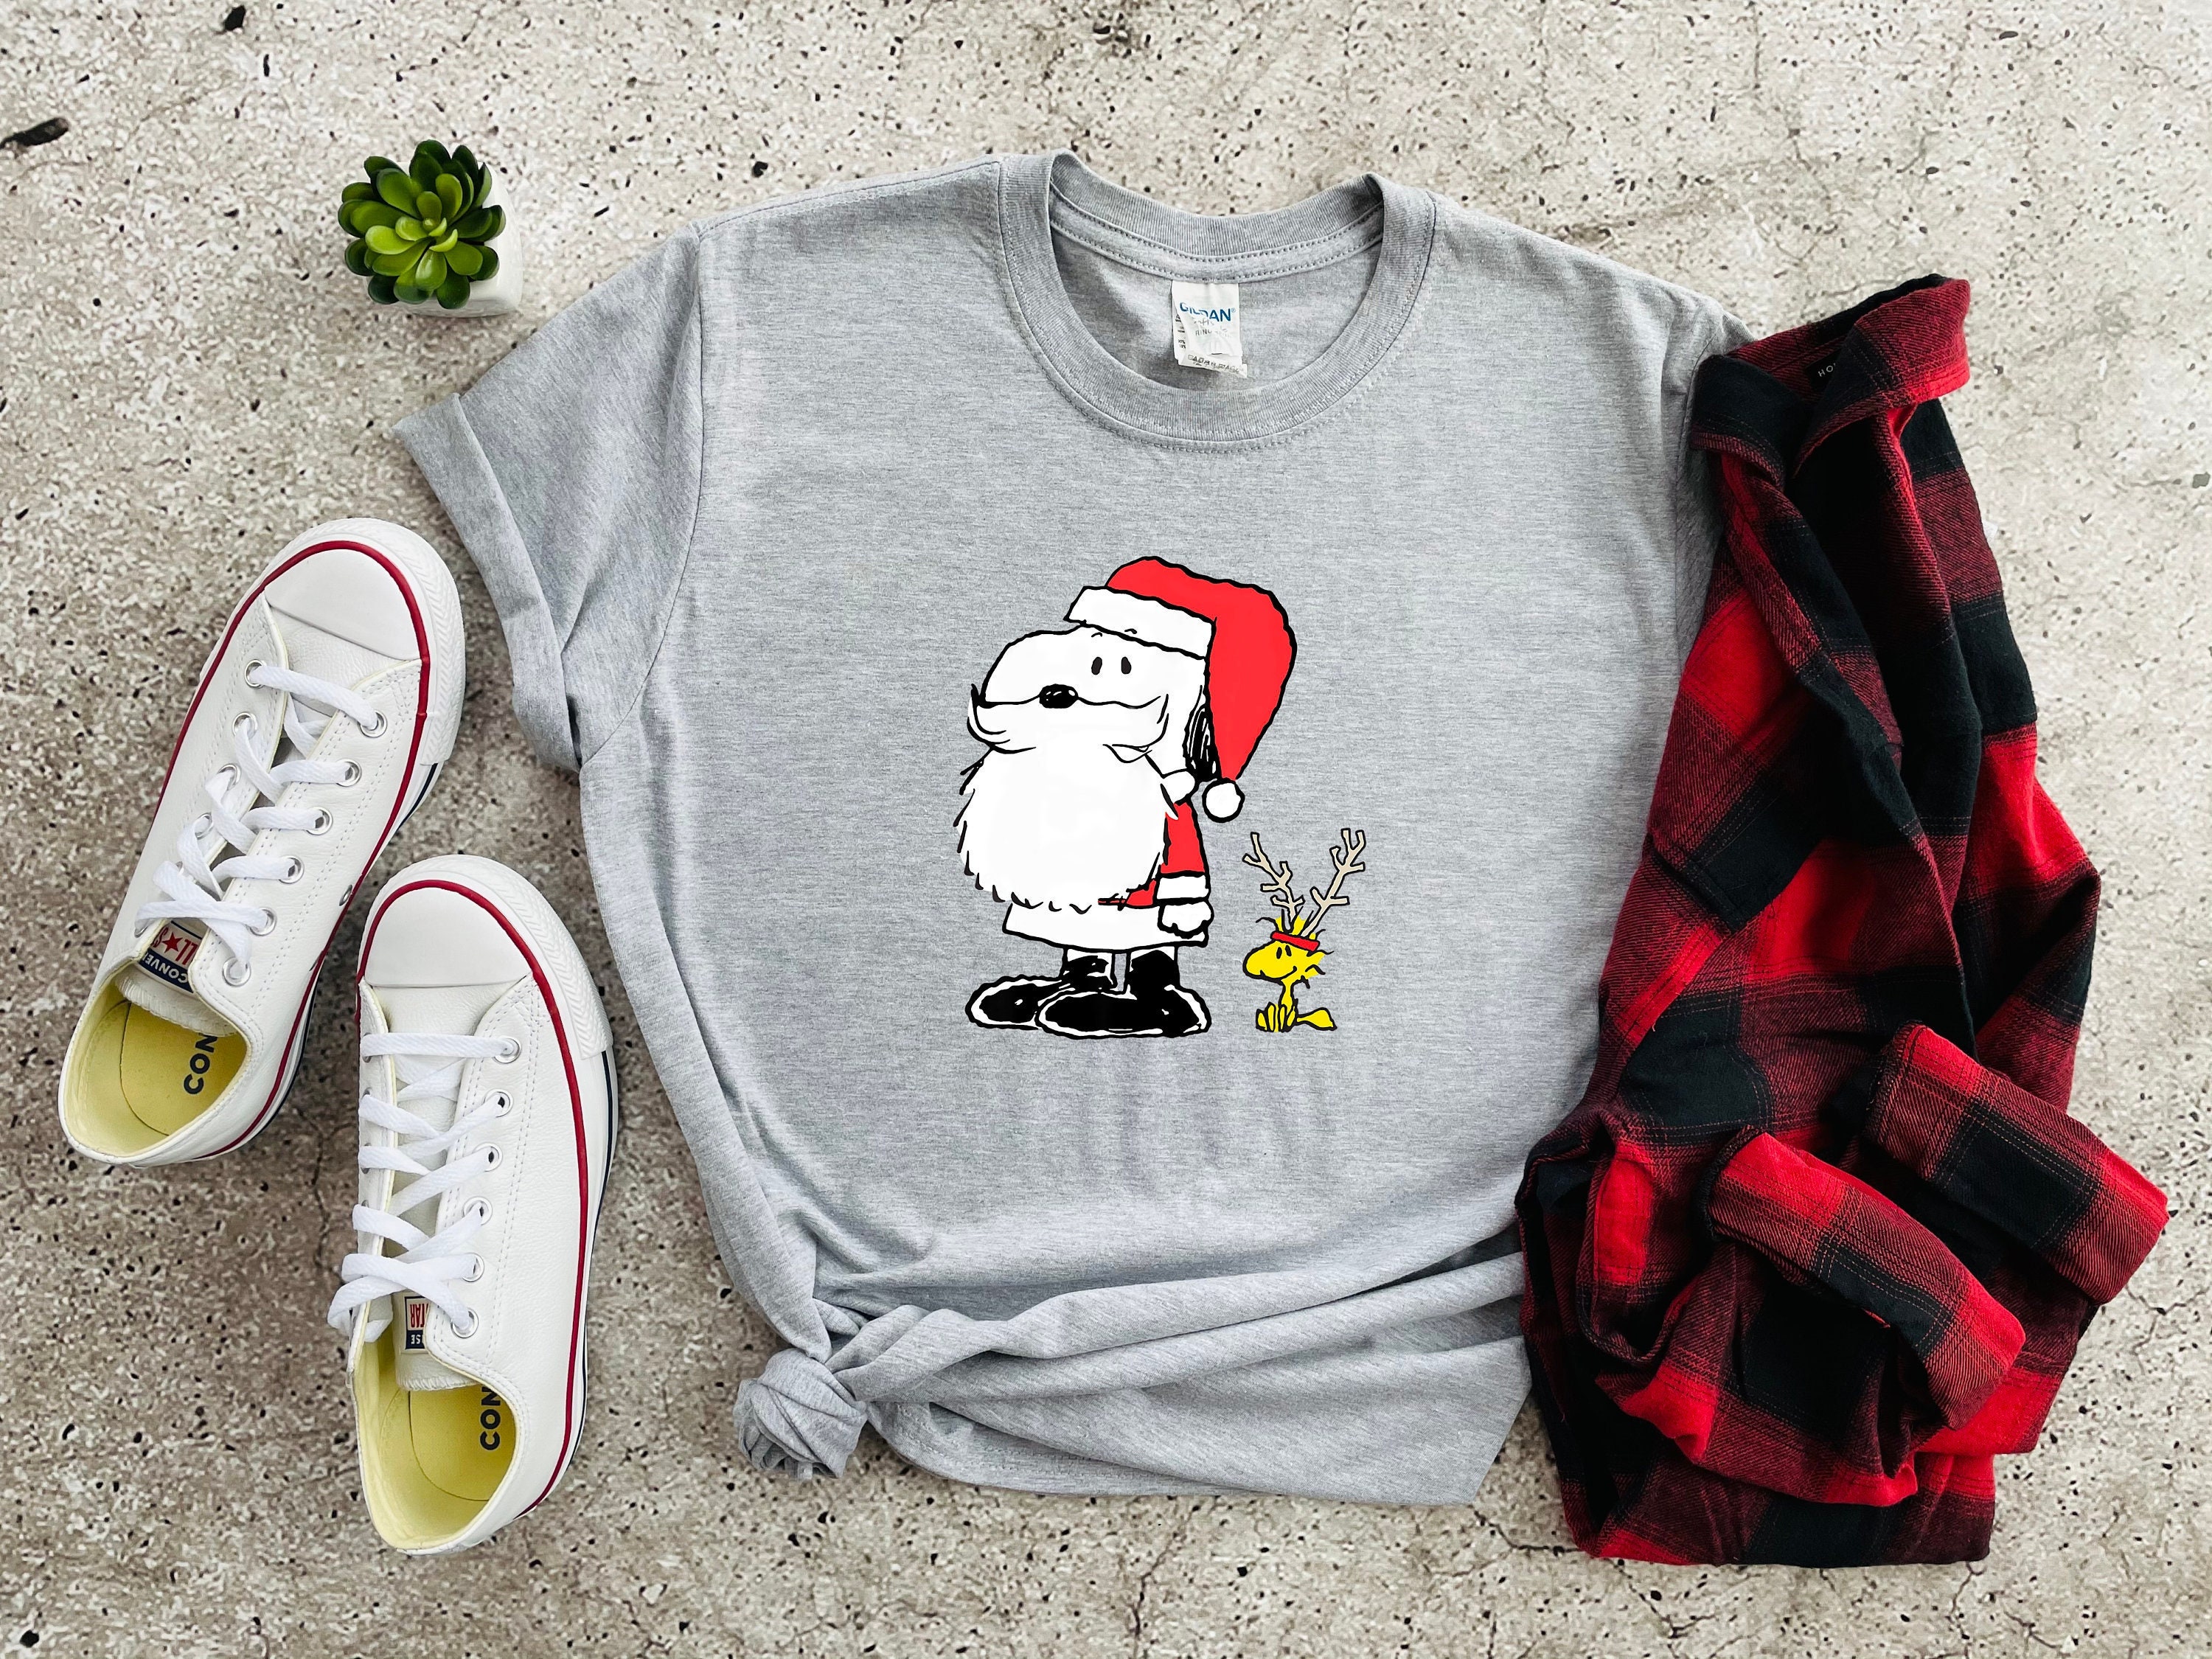 Snoopy Christmas Night Shirt-  Peanuts  Christmas Shirt- Snoopy, Woodstock, Charlie Brown- Xmas Gift For Family, Friend, Snoopy Lover